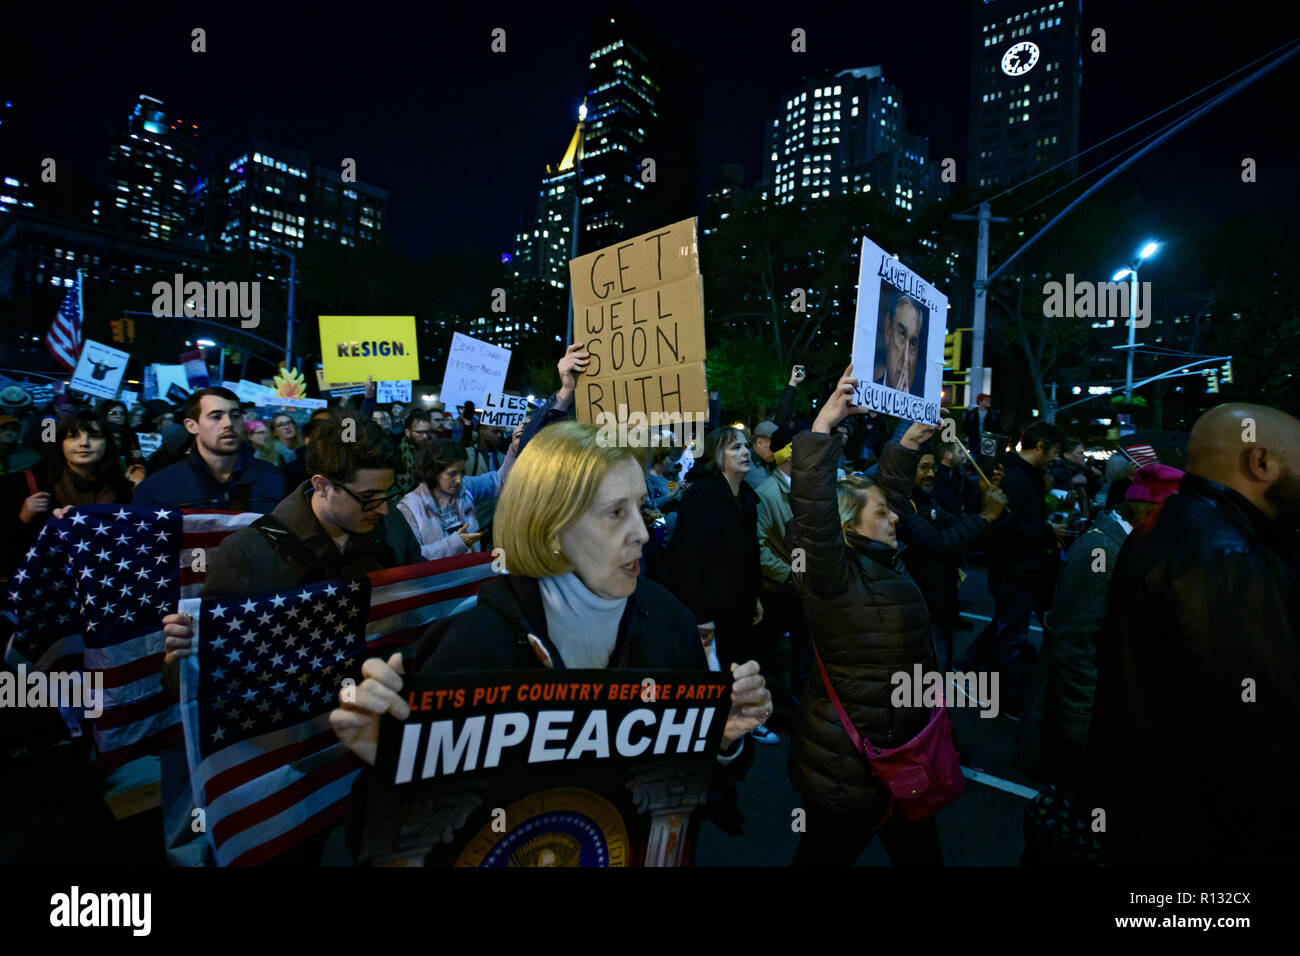 New York, USA. November 8, 2018 Thousands of people marched from Times Square to Union Square during the evening rush hour to protest against the departure of Jeff Sessions as the Trump administration’s attorney general and to defend the Mueller Russia investigation.  The march was one of dozens scheduled for 5 p.m. local time in cities across the USA., according to advocacy group MoveOn.org Civic Action. Credit: Joseph Reid/Alamy Live News Stock Photo